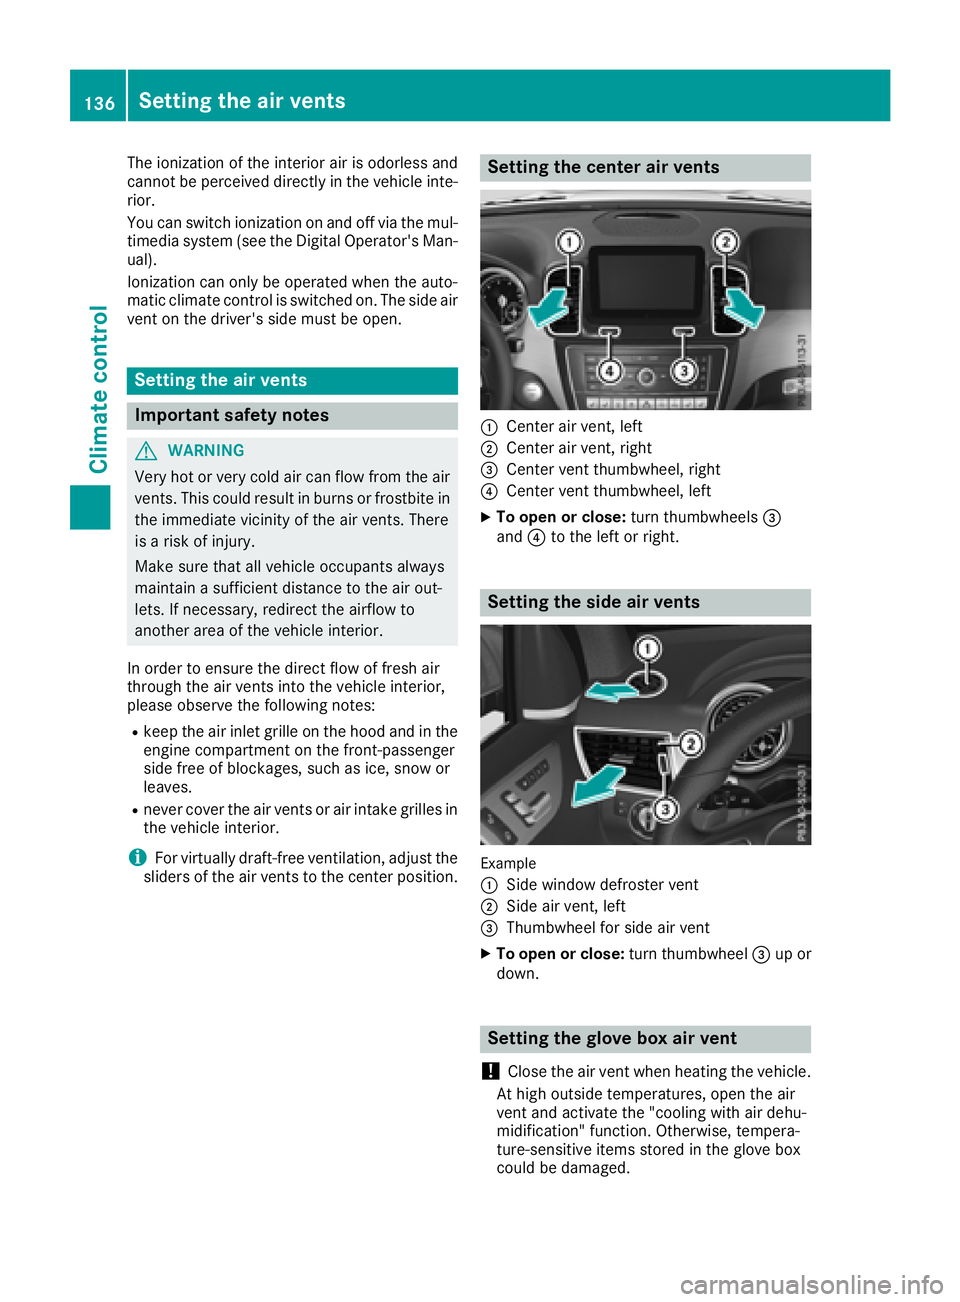 MERCEDES-BENZ GLS 2018  Owners Manual The ionization of the interior air is odorless and
cannot be perceived directly in the vehicle inte-
rior.
You can switch ionization on and off via the mul-
timedia system (see the Digital Operator